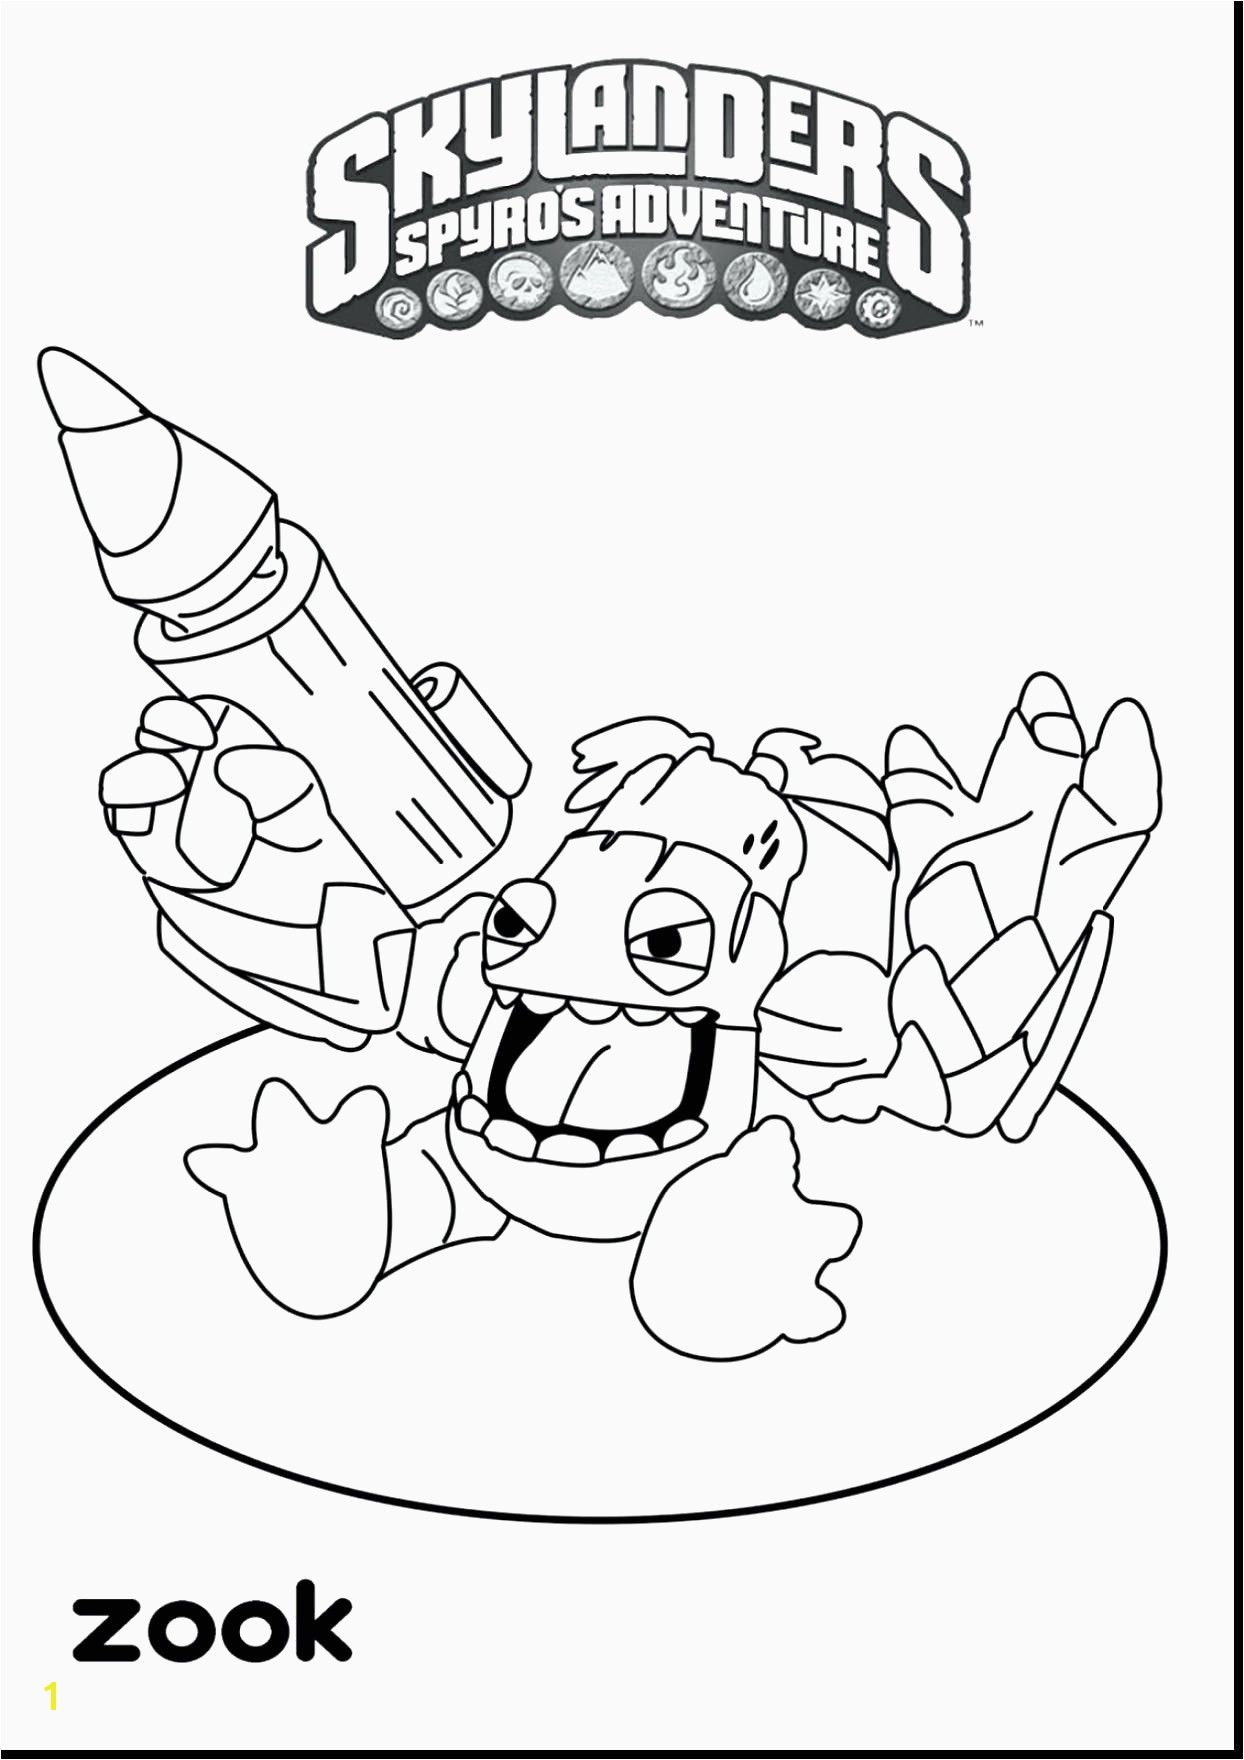 Coloring Pages to Print Best Coloring Pages Parrot Bird Inspirational Coloring Pages for Kides